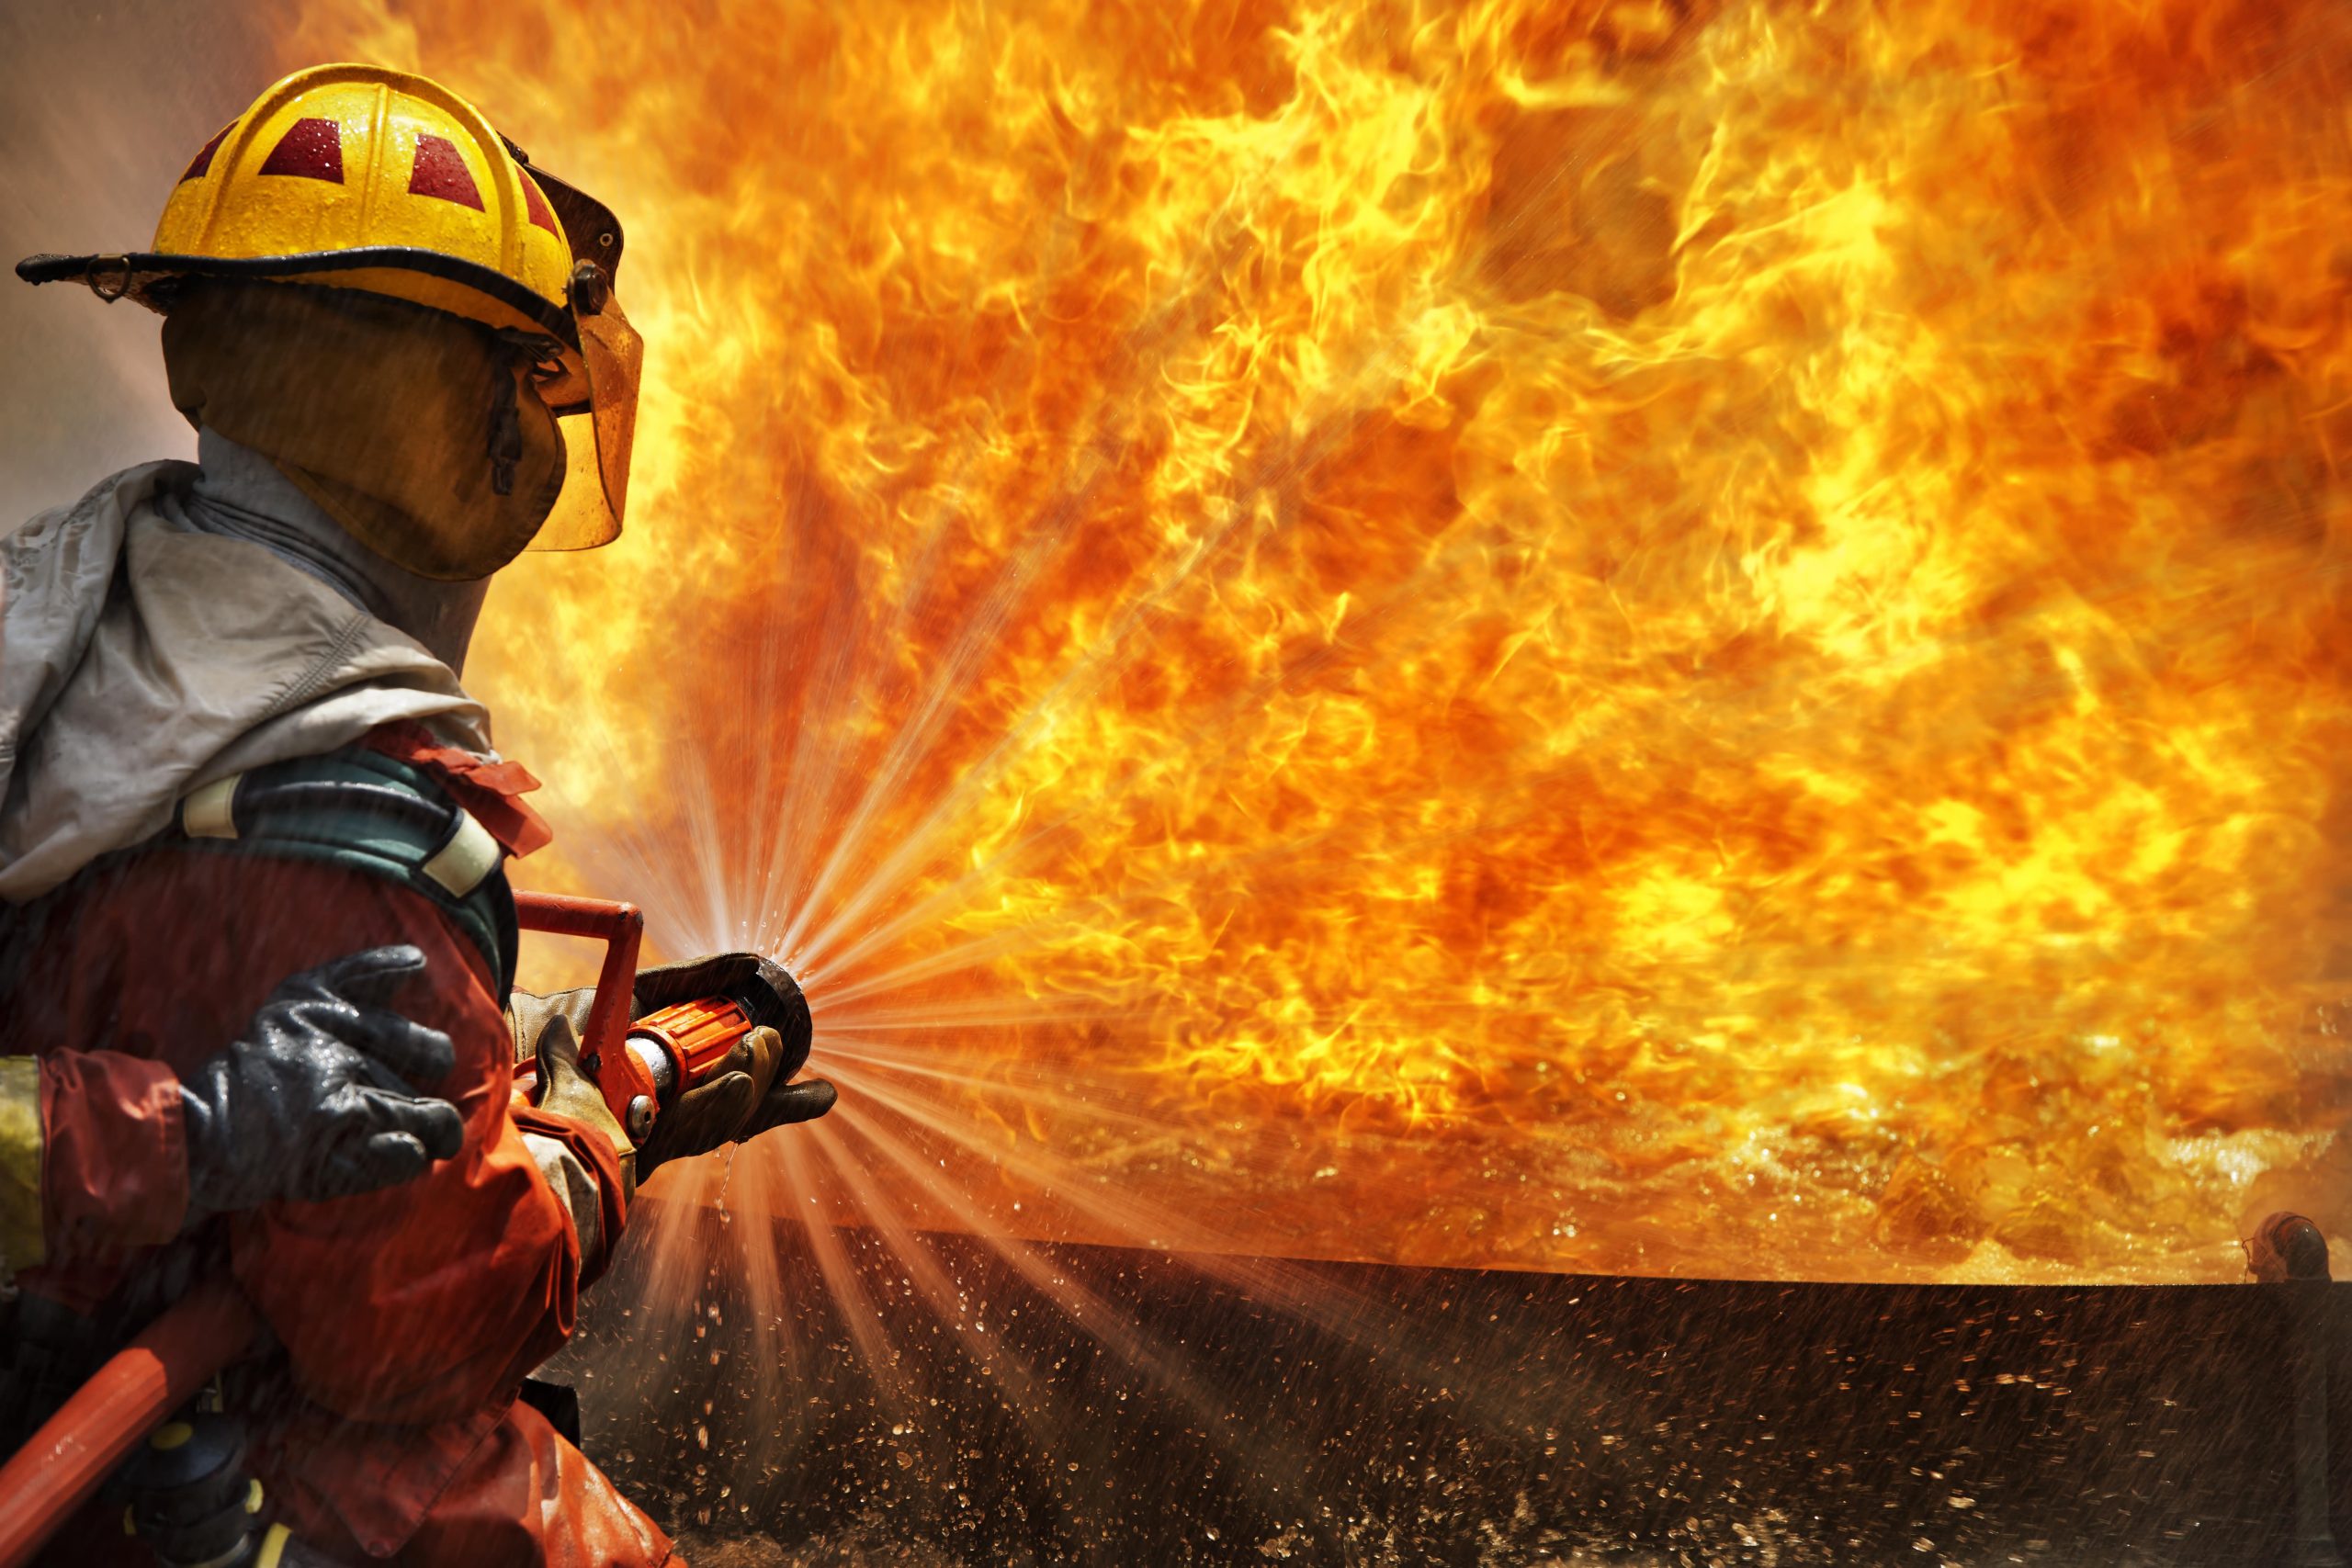 Fire risk assessments in Harrow, Wembley and Uxbridge | Property Checks